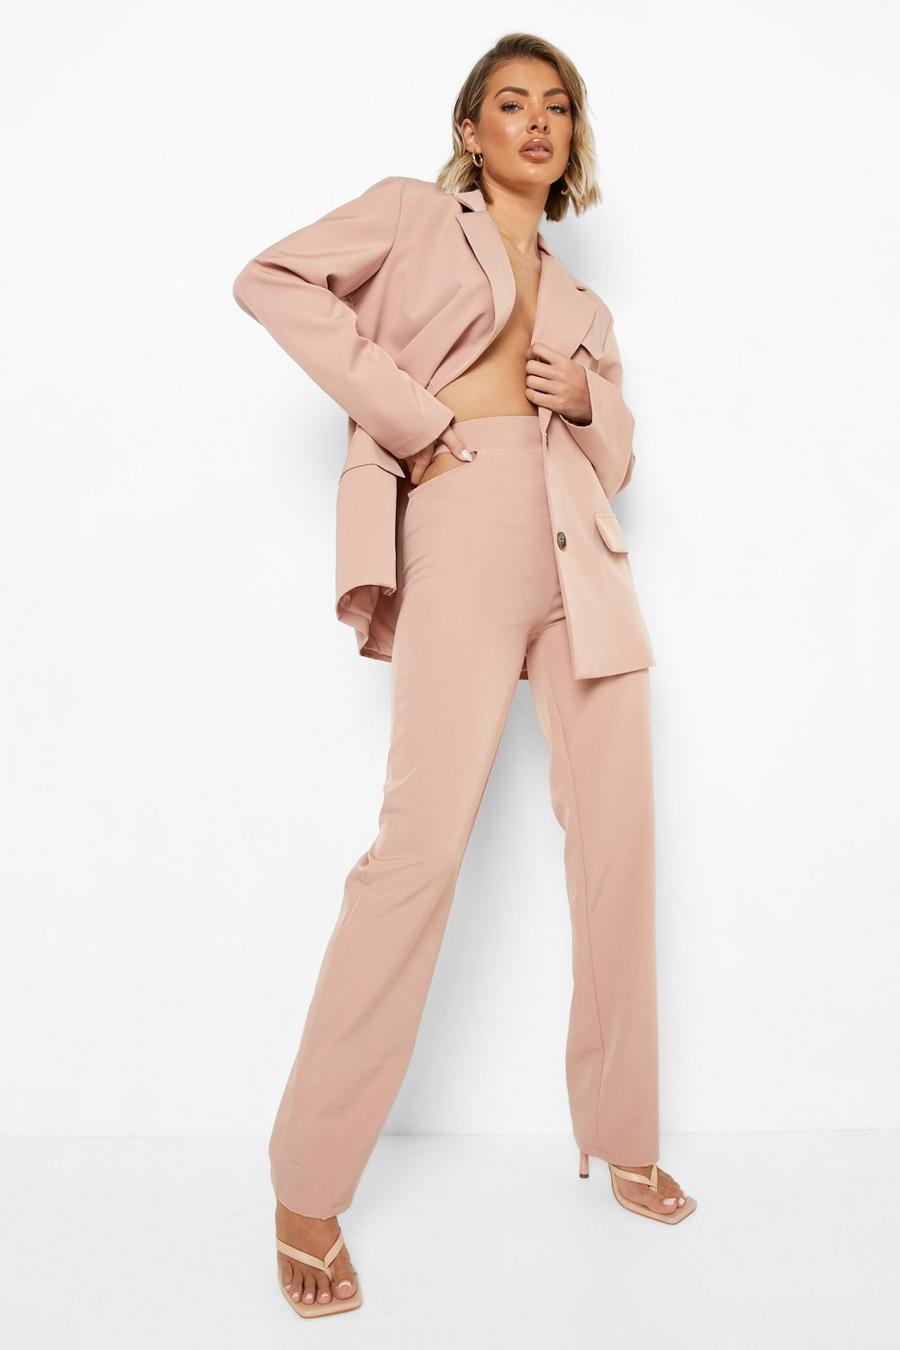 Nude Cut Out Side Dress Pants image number 1